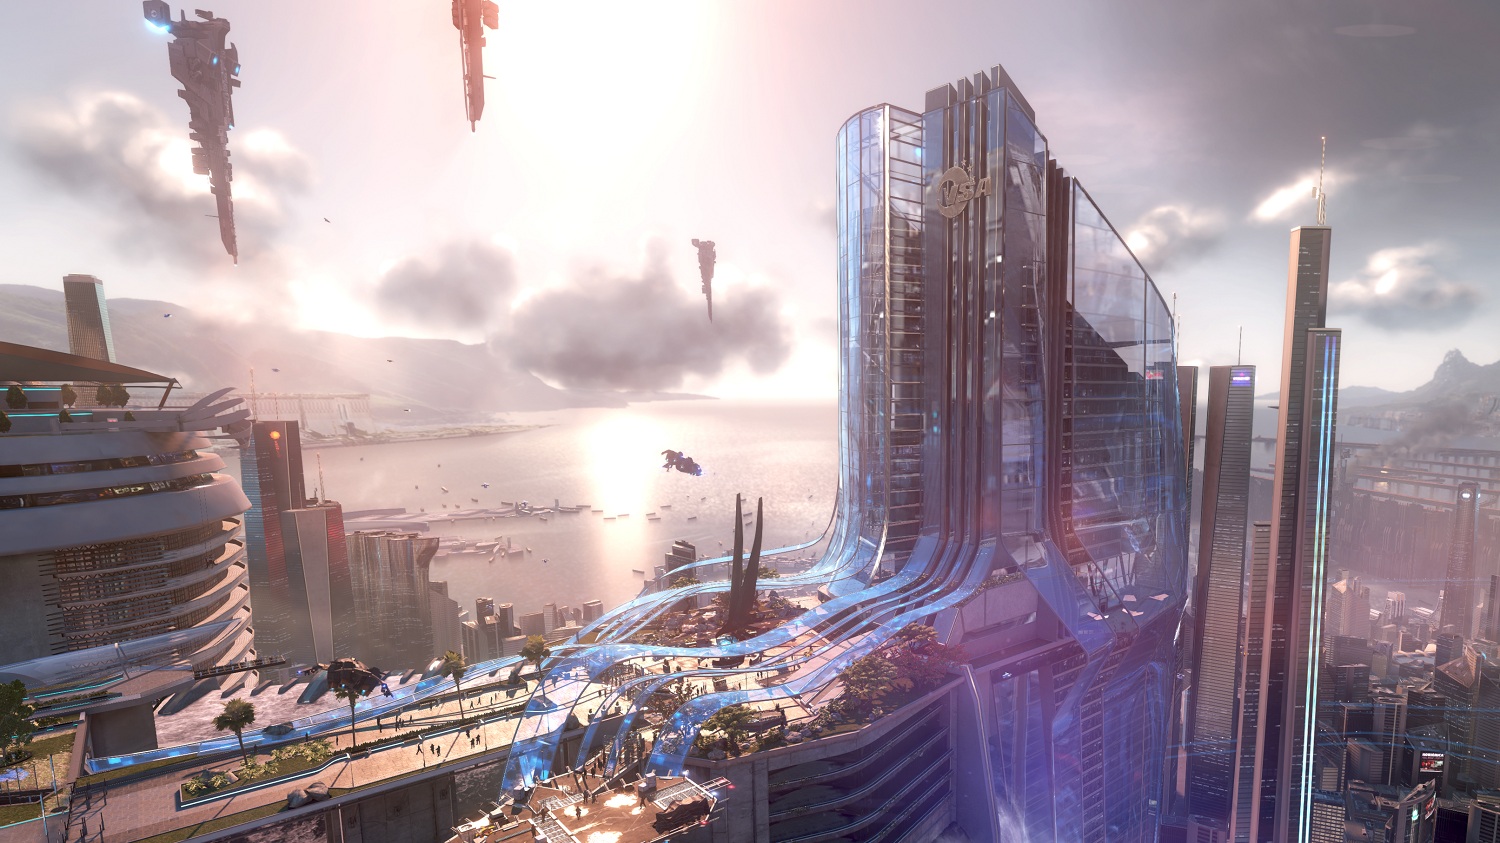 Hands-on with 'Killzone: Shadow Fall